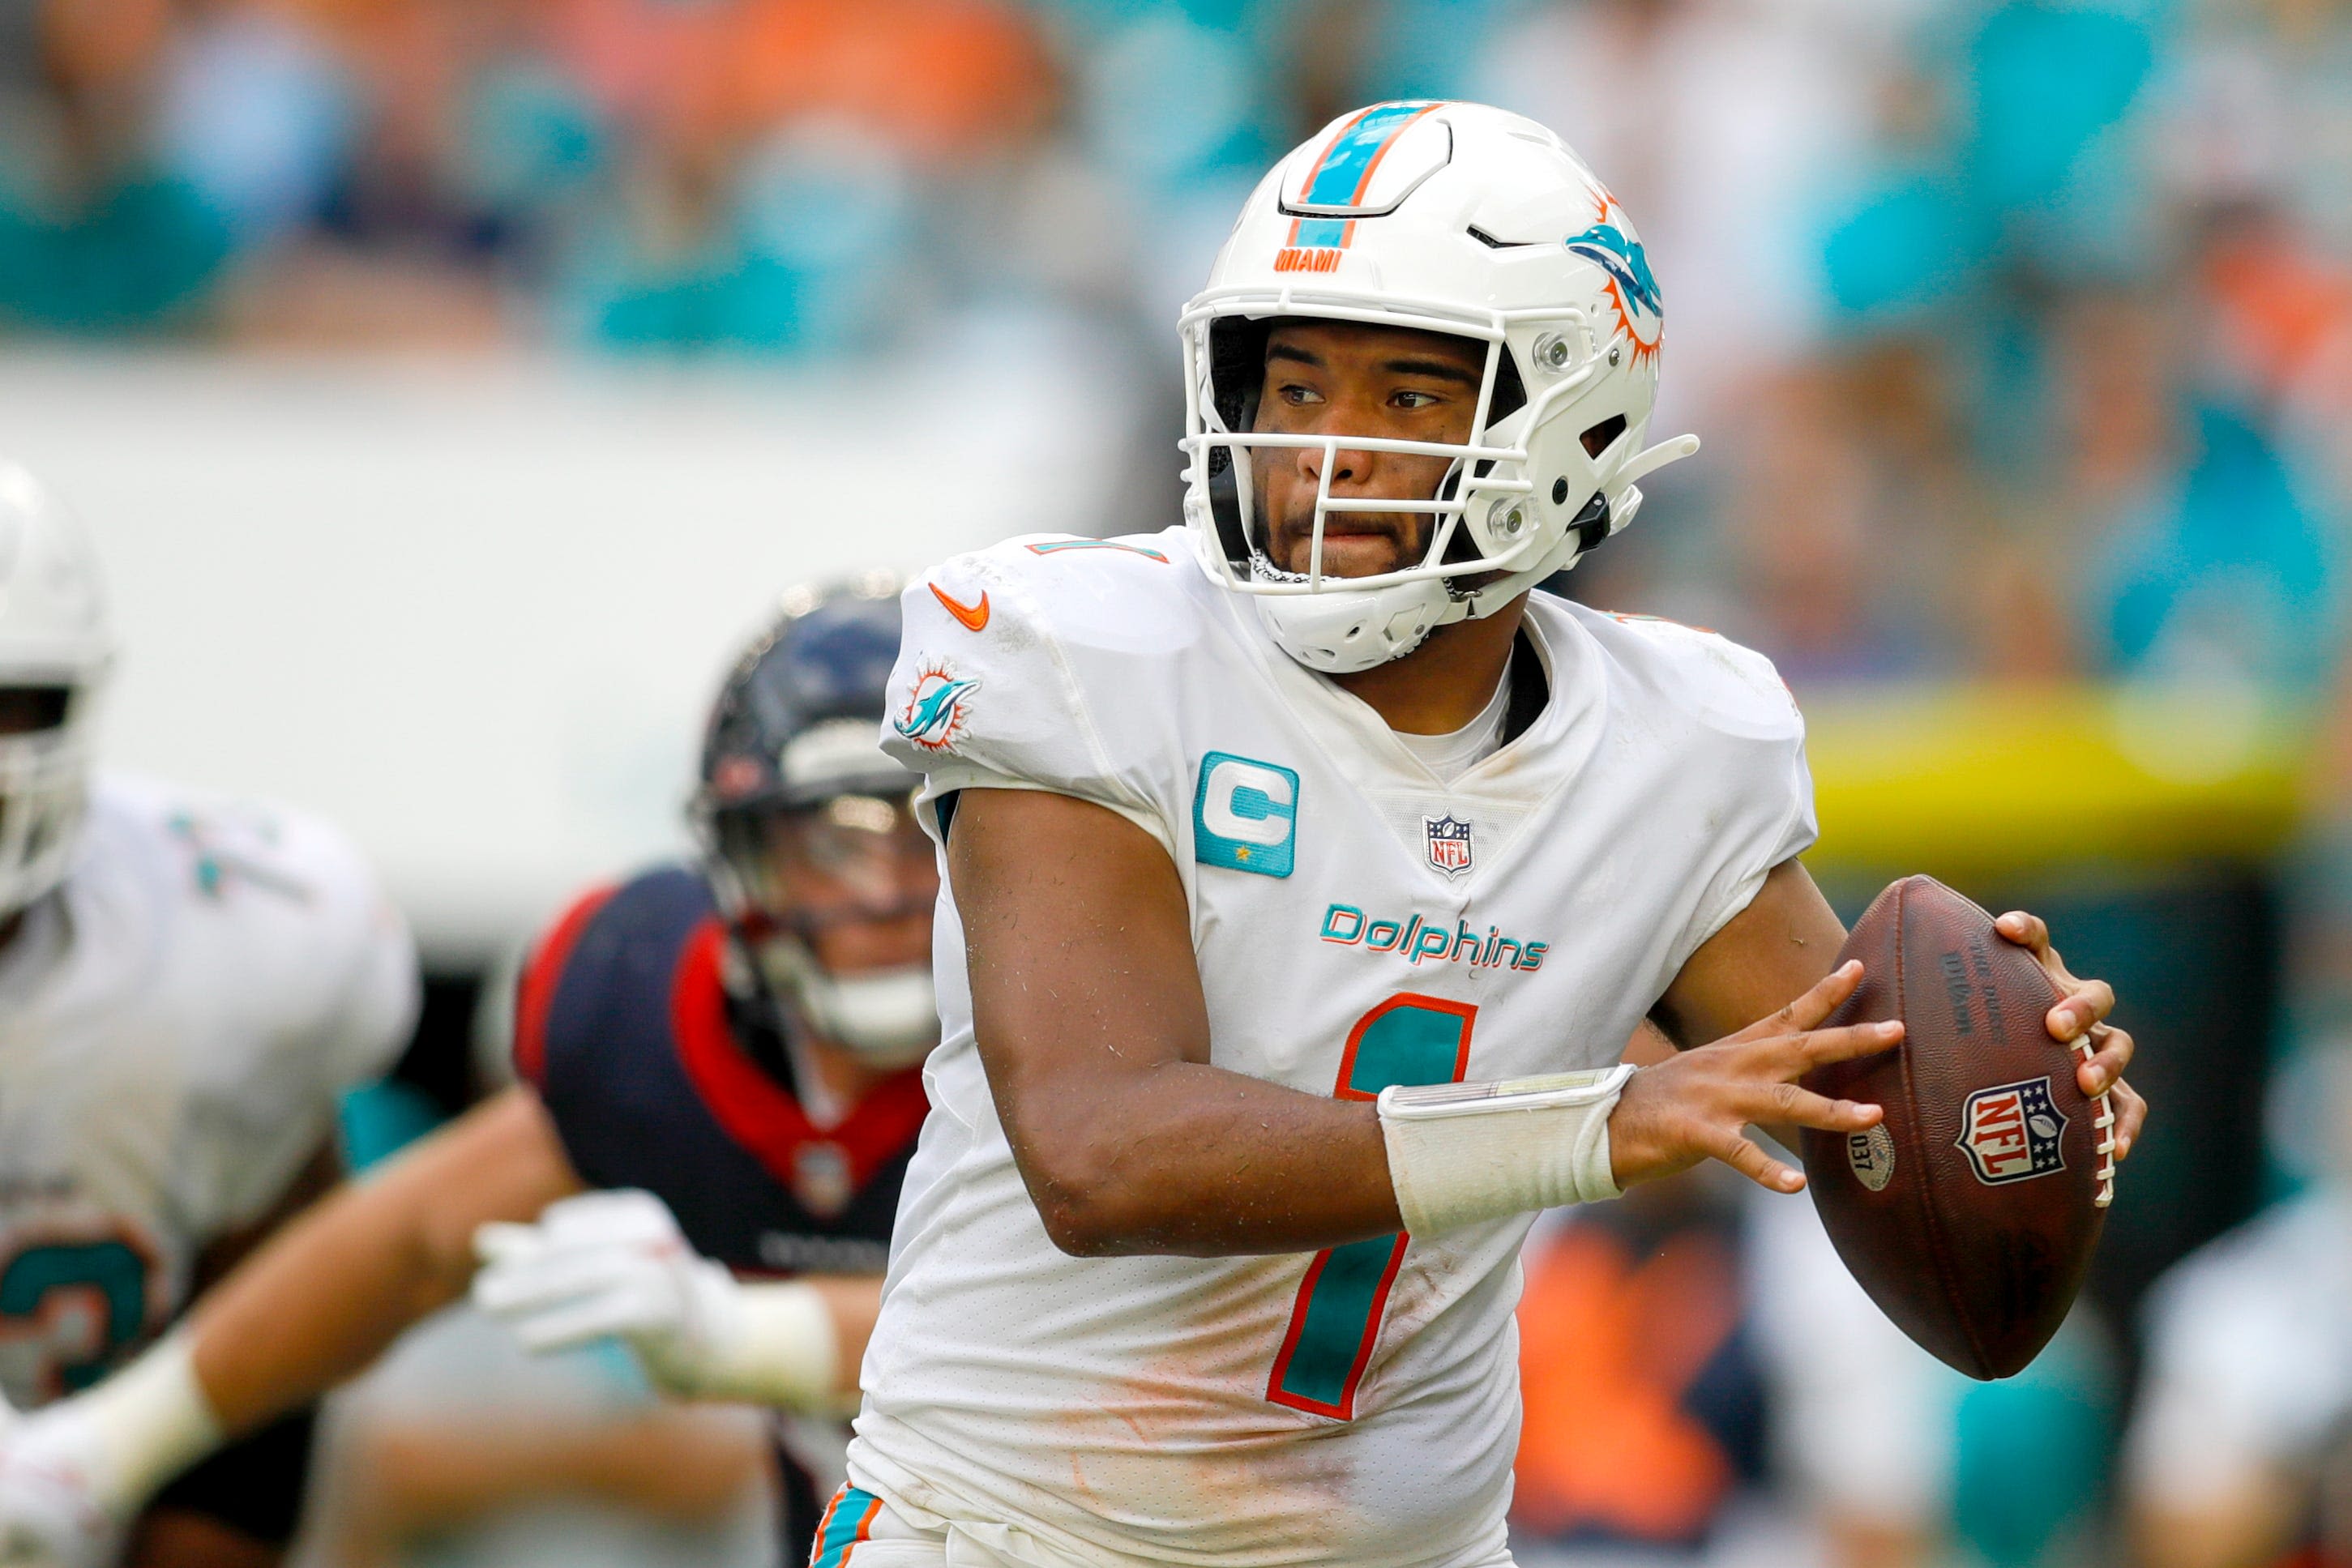 Grading the Miami Dolphins' 2020 draft after four years. How did they do?